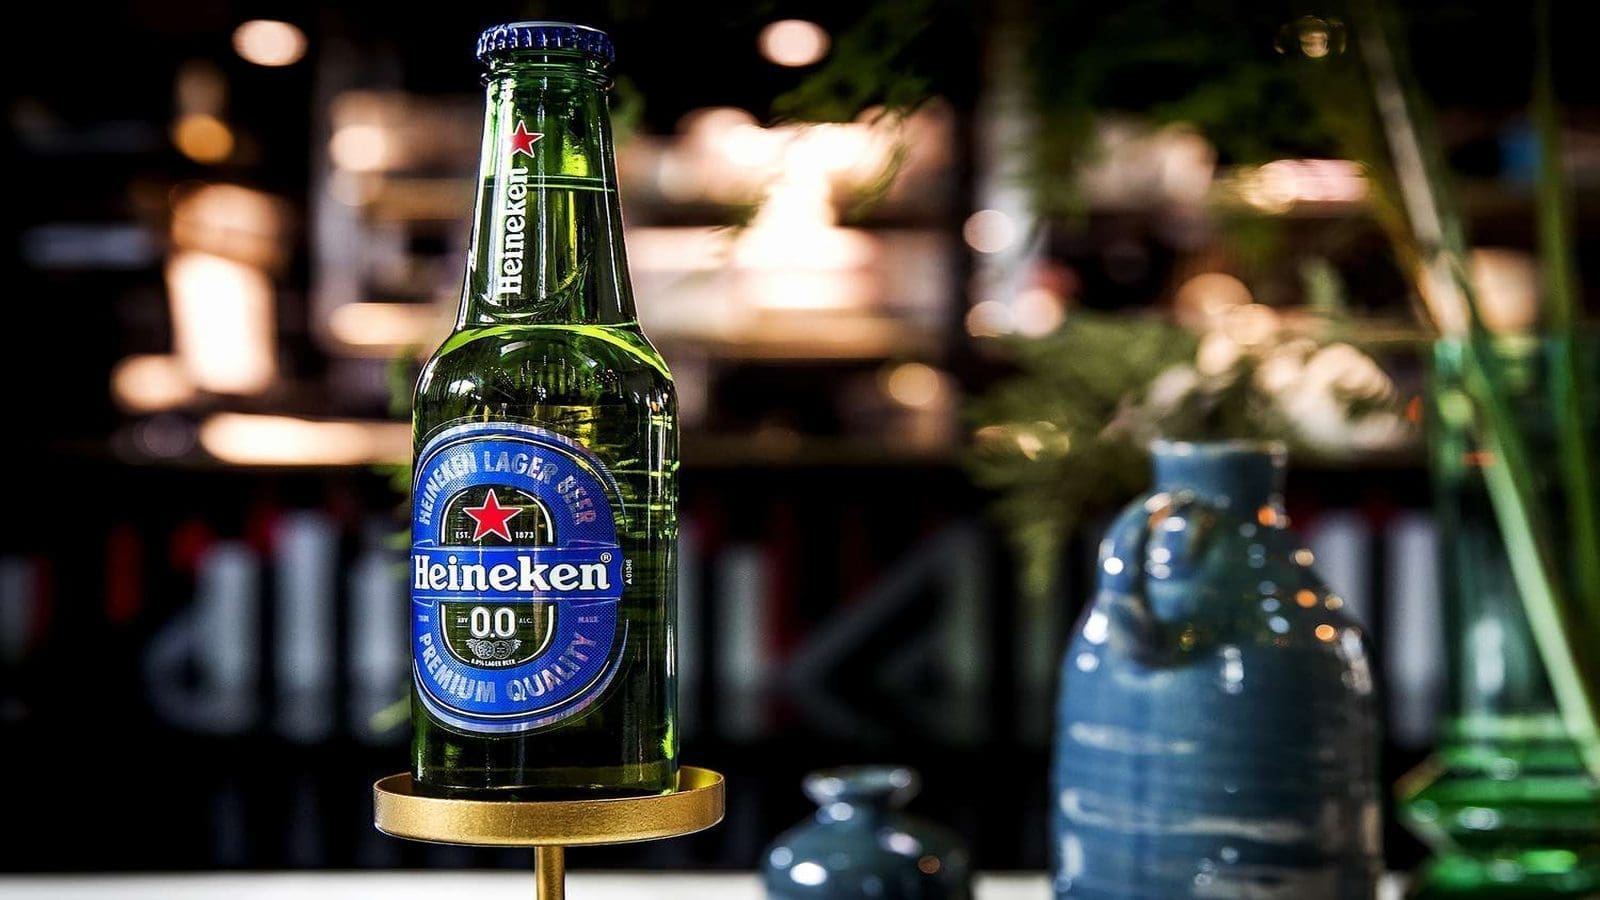 Heineken beer volumes grow 6.9% in 2022 driven by strong recovery in Asia Pacific and Europe